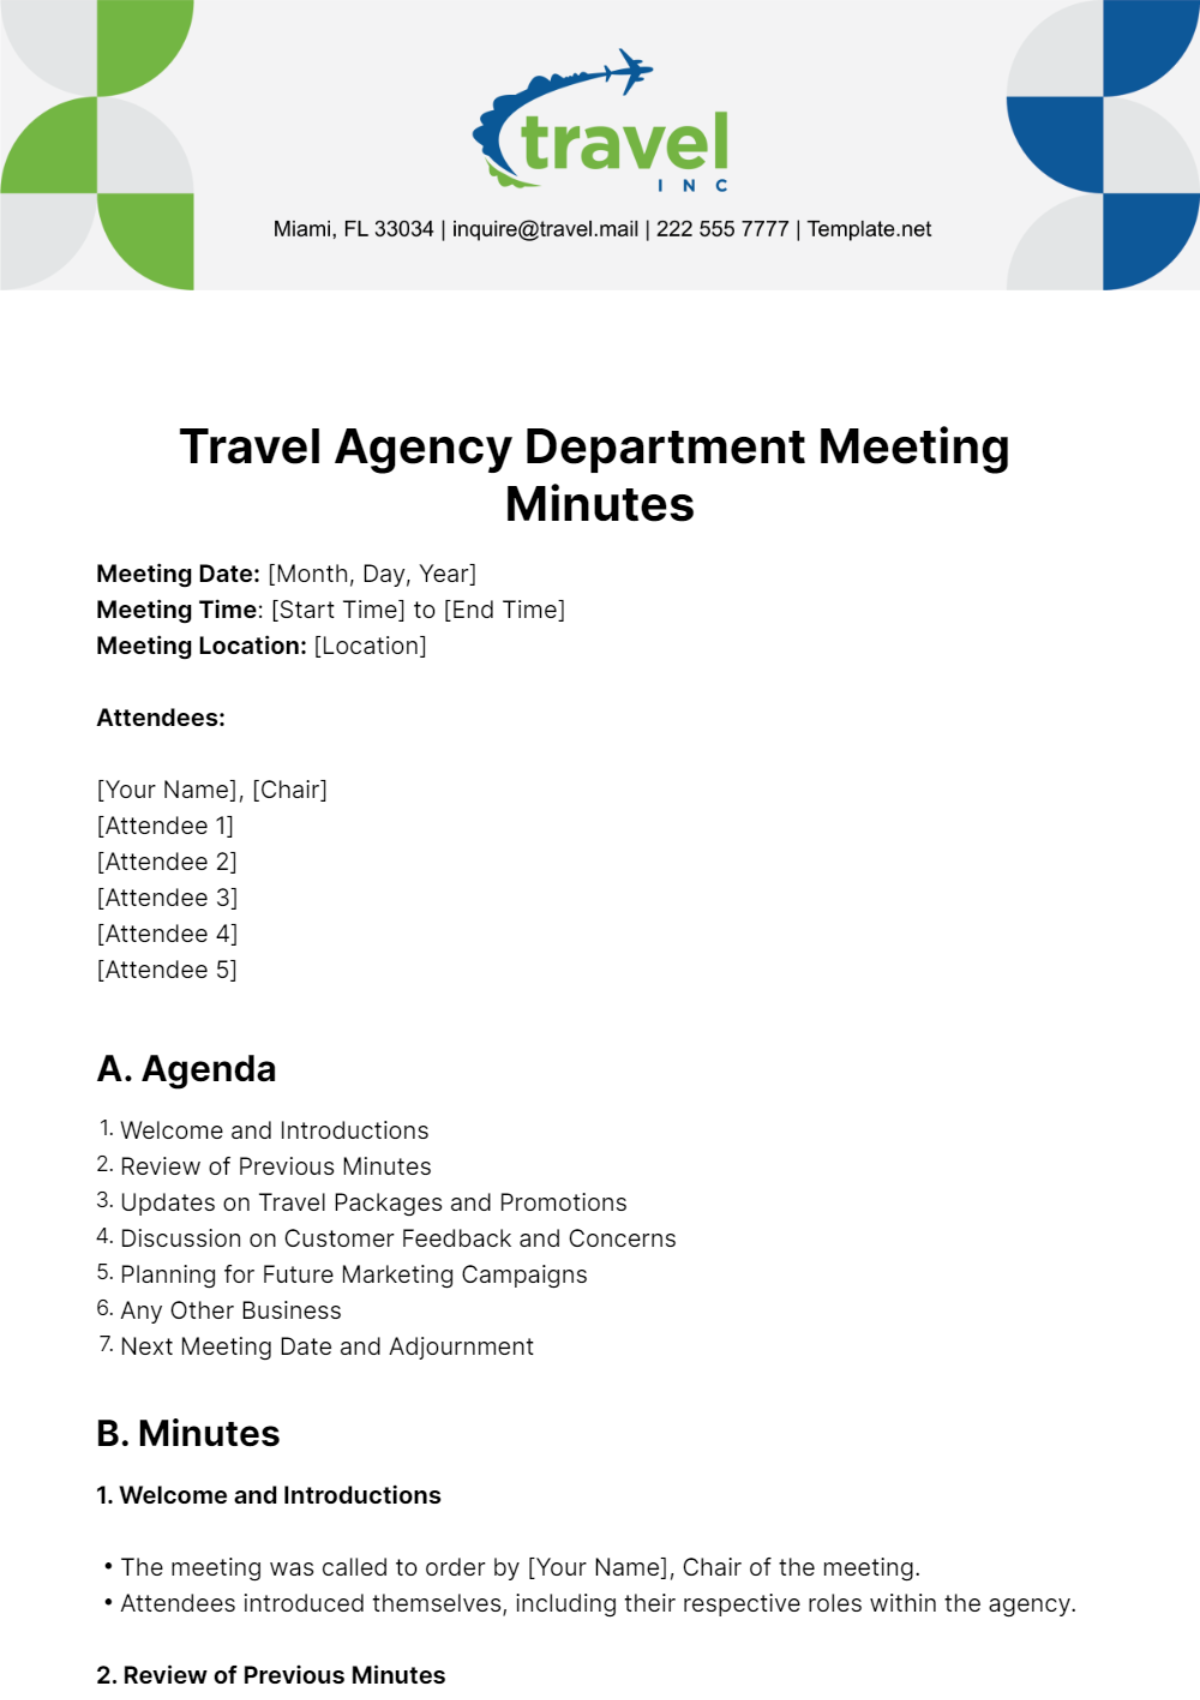 Free Travel Agency Department Meeting Minutes Template